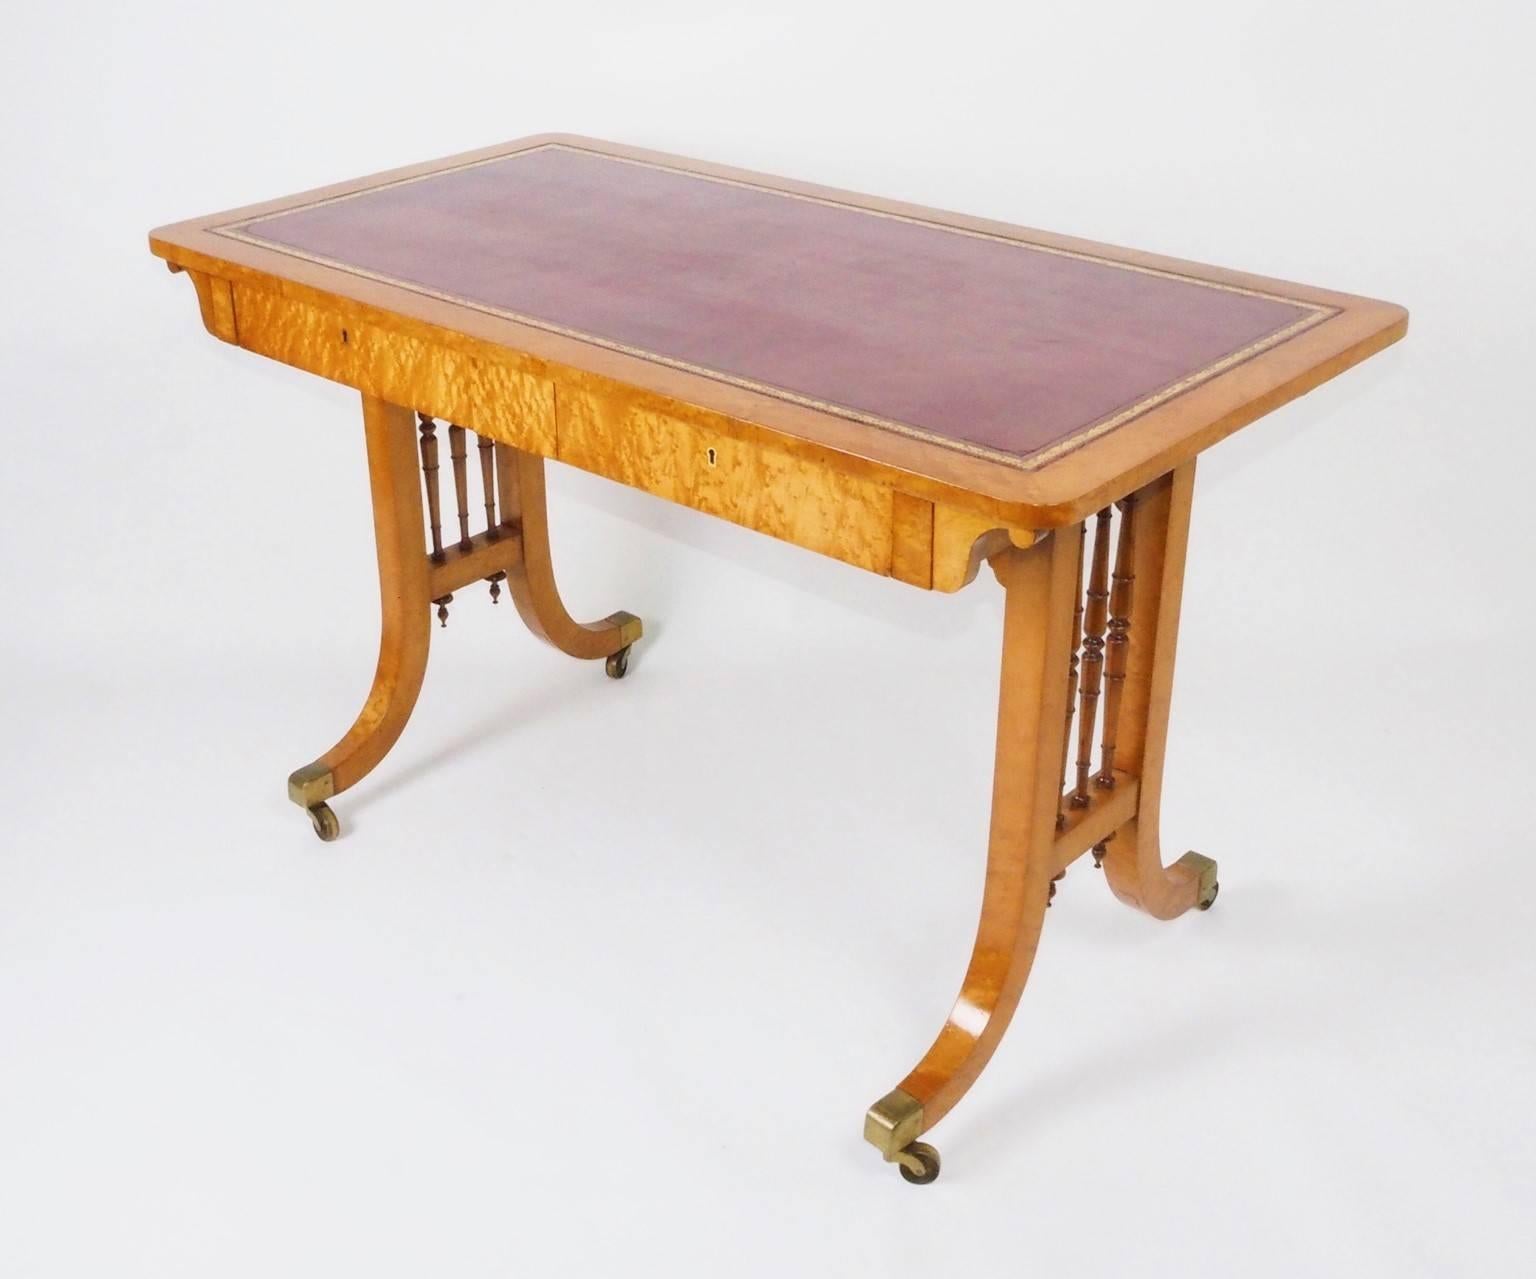 Fine quality writing table, stamped 'Gillows' with typical Gillows 'spindle ends' and 'Hockey stick' uprights, see page 301 